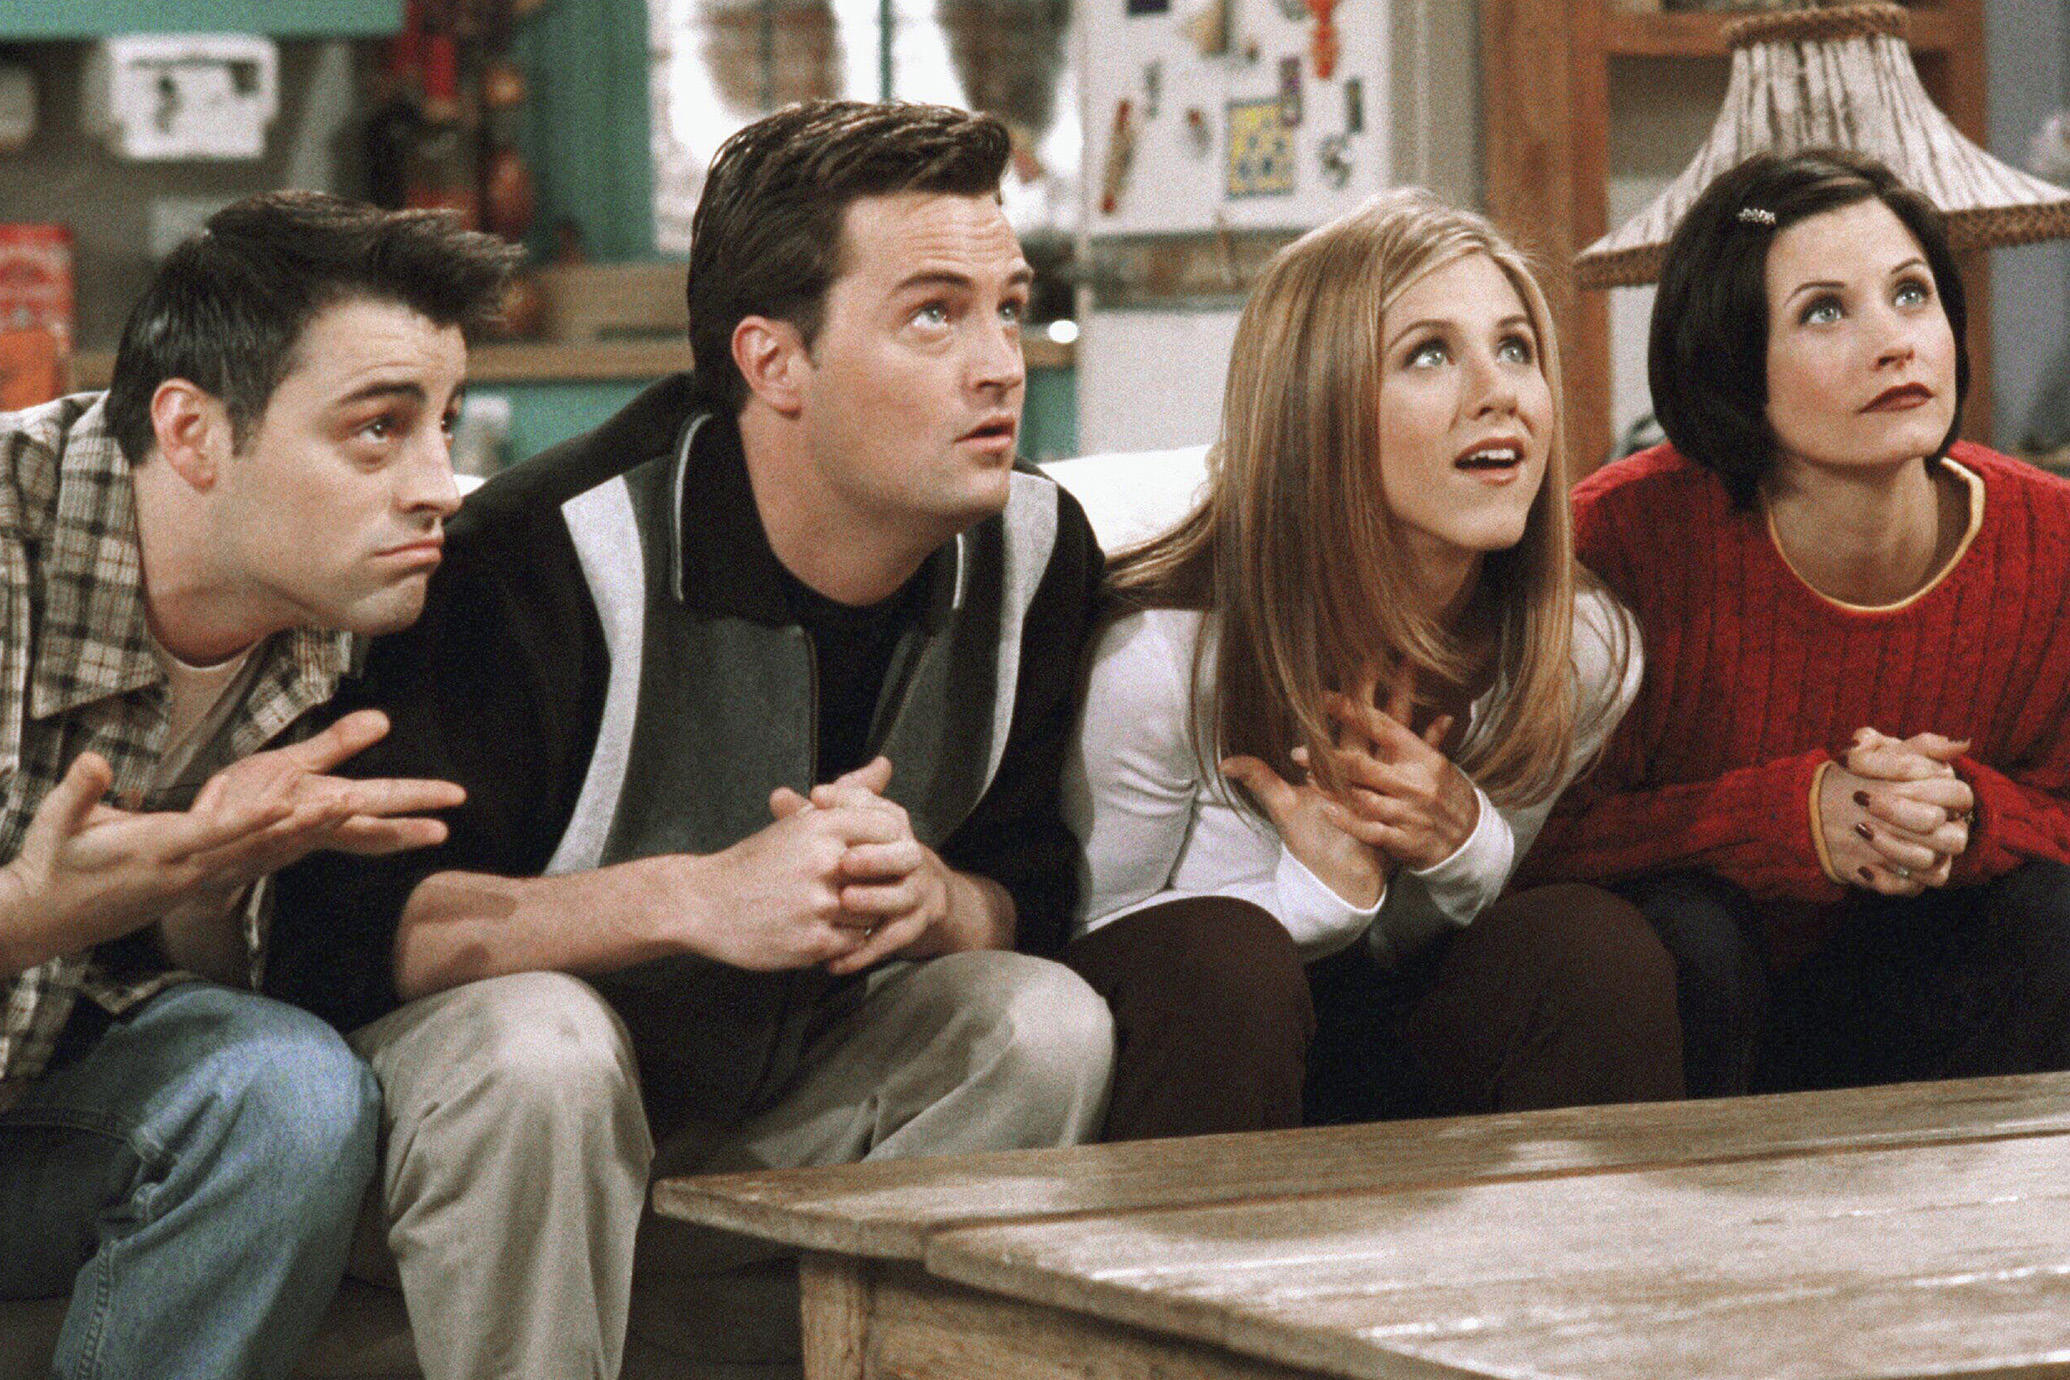 Friends: Oral History of the Trivia Game Episode 